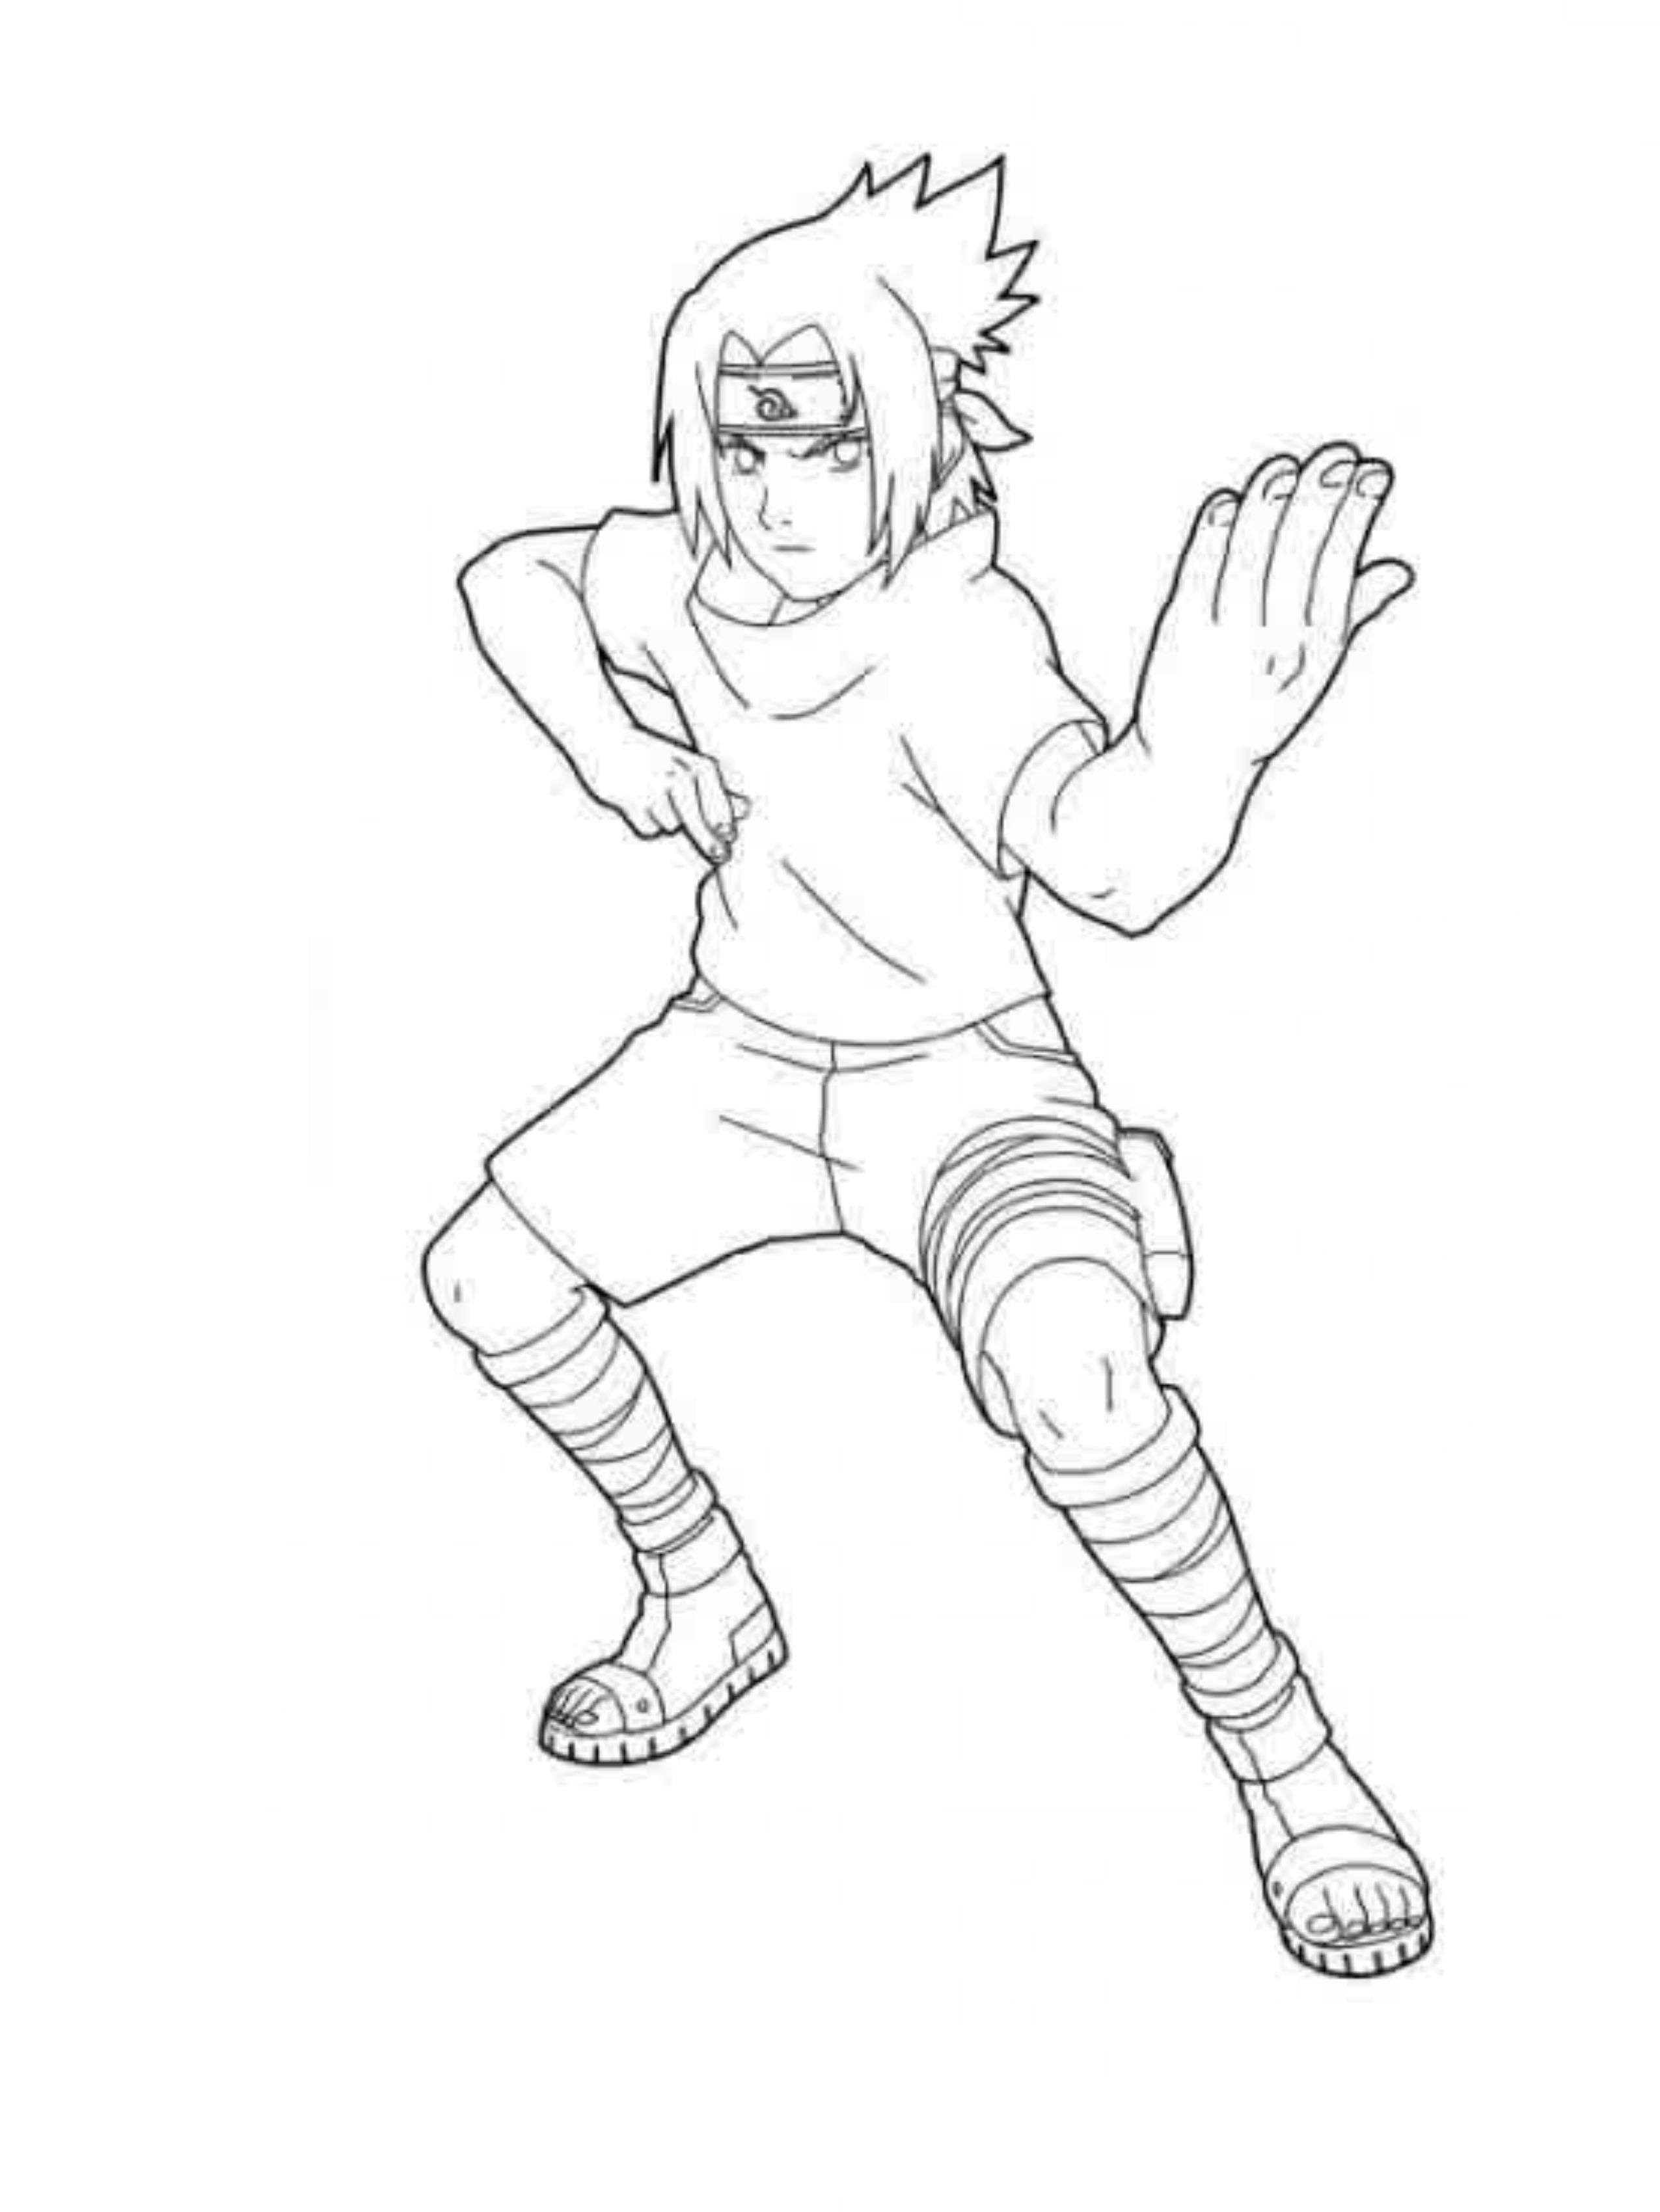 Naruto Shippuden Coloring Book - Coloring Pages for Kids and for ...